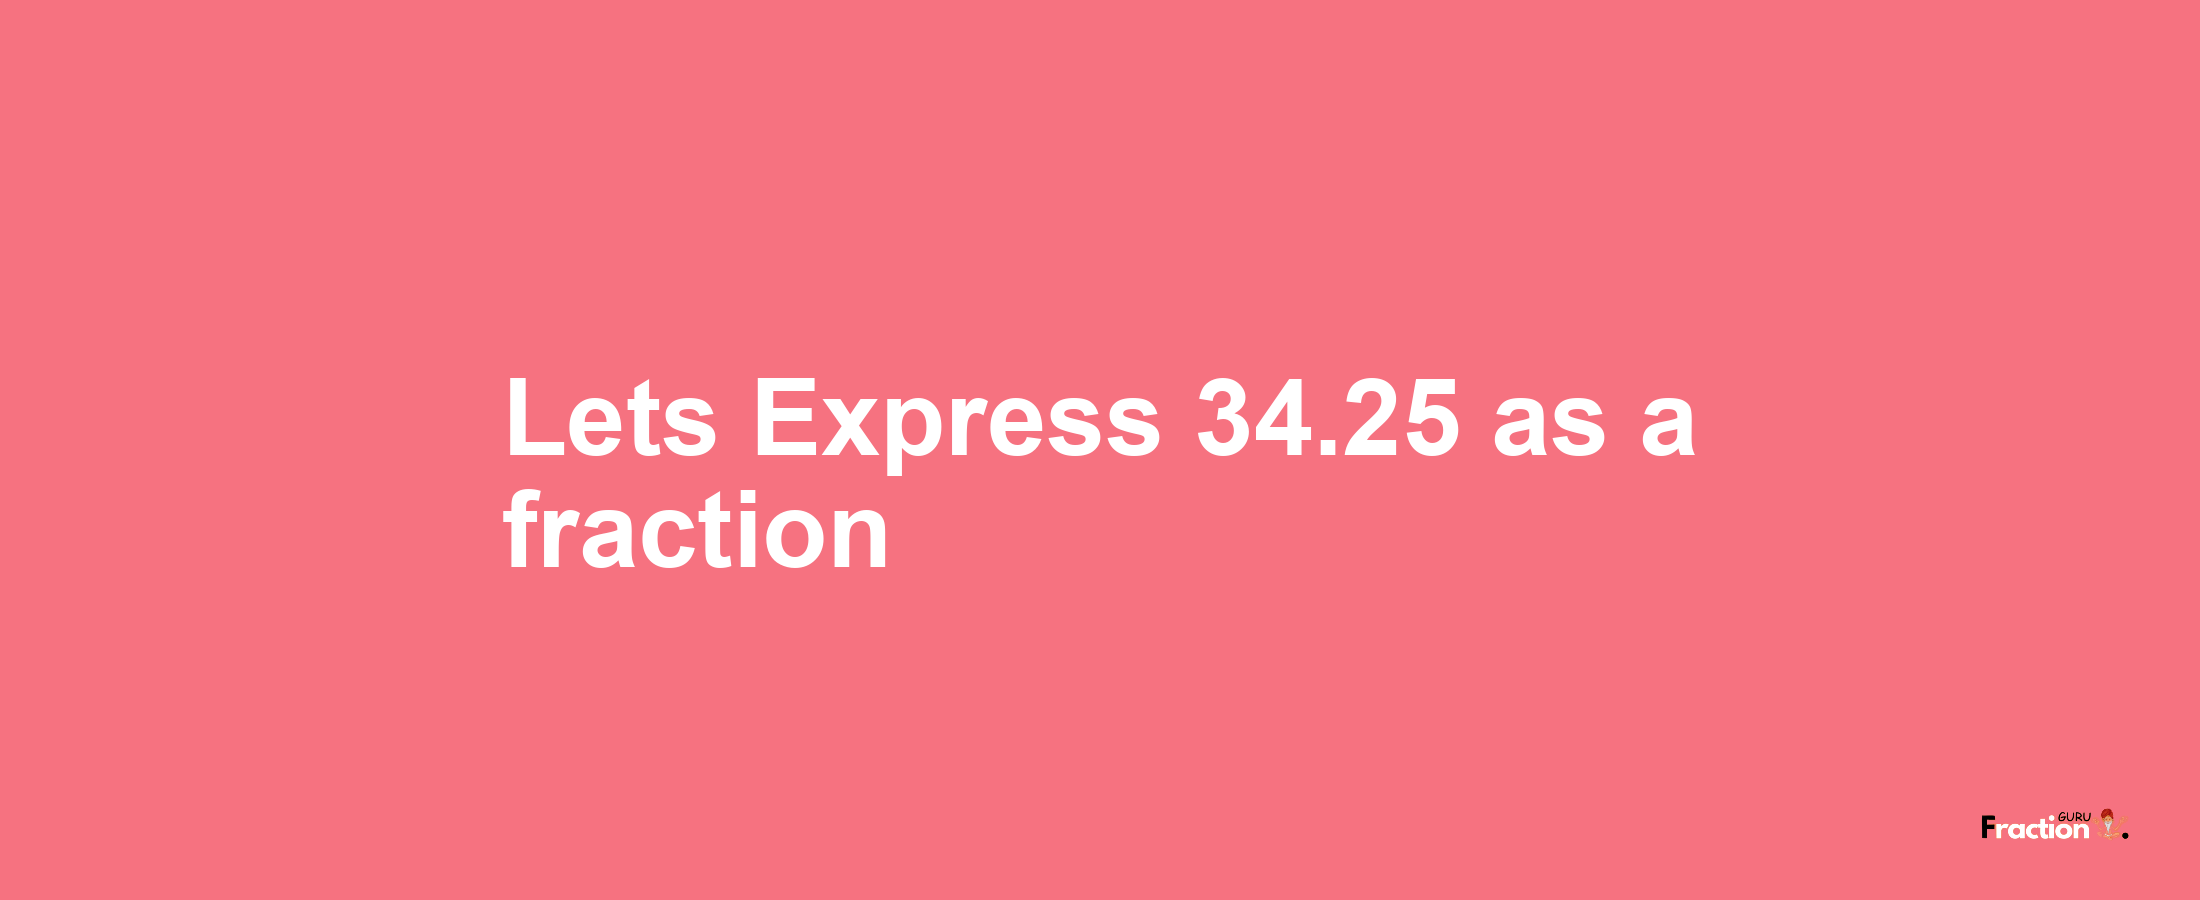 Lets Express 34.25 as afraction